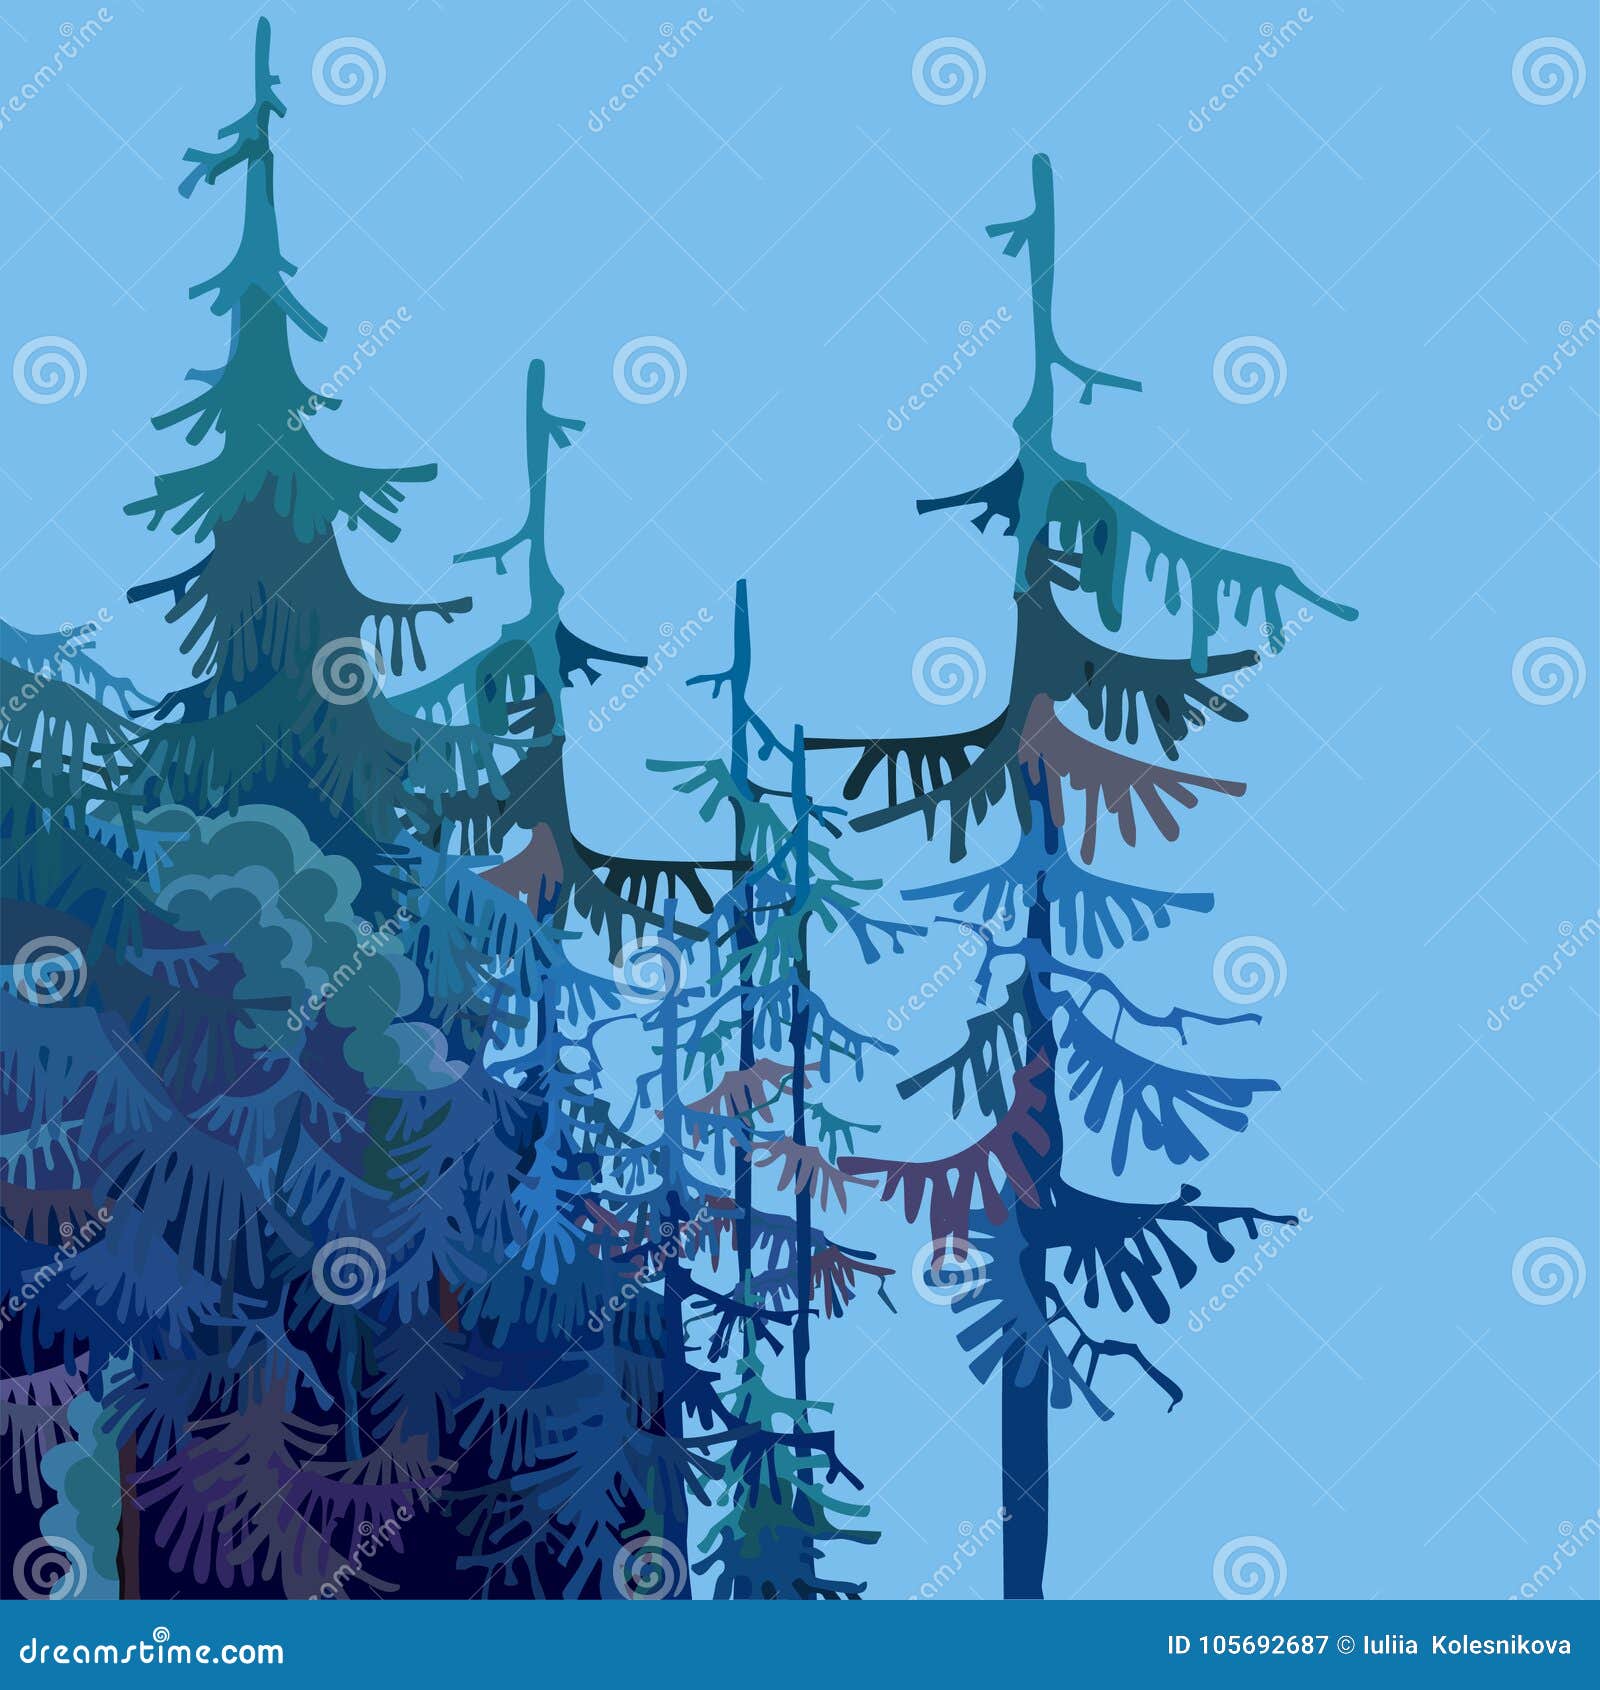 Part of a cartoon forest with fir trees in blue-green tones